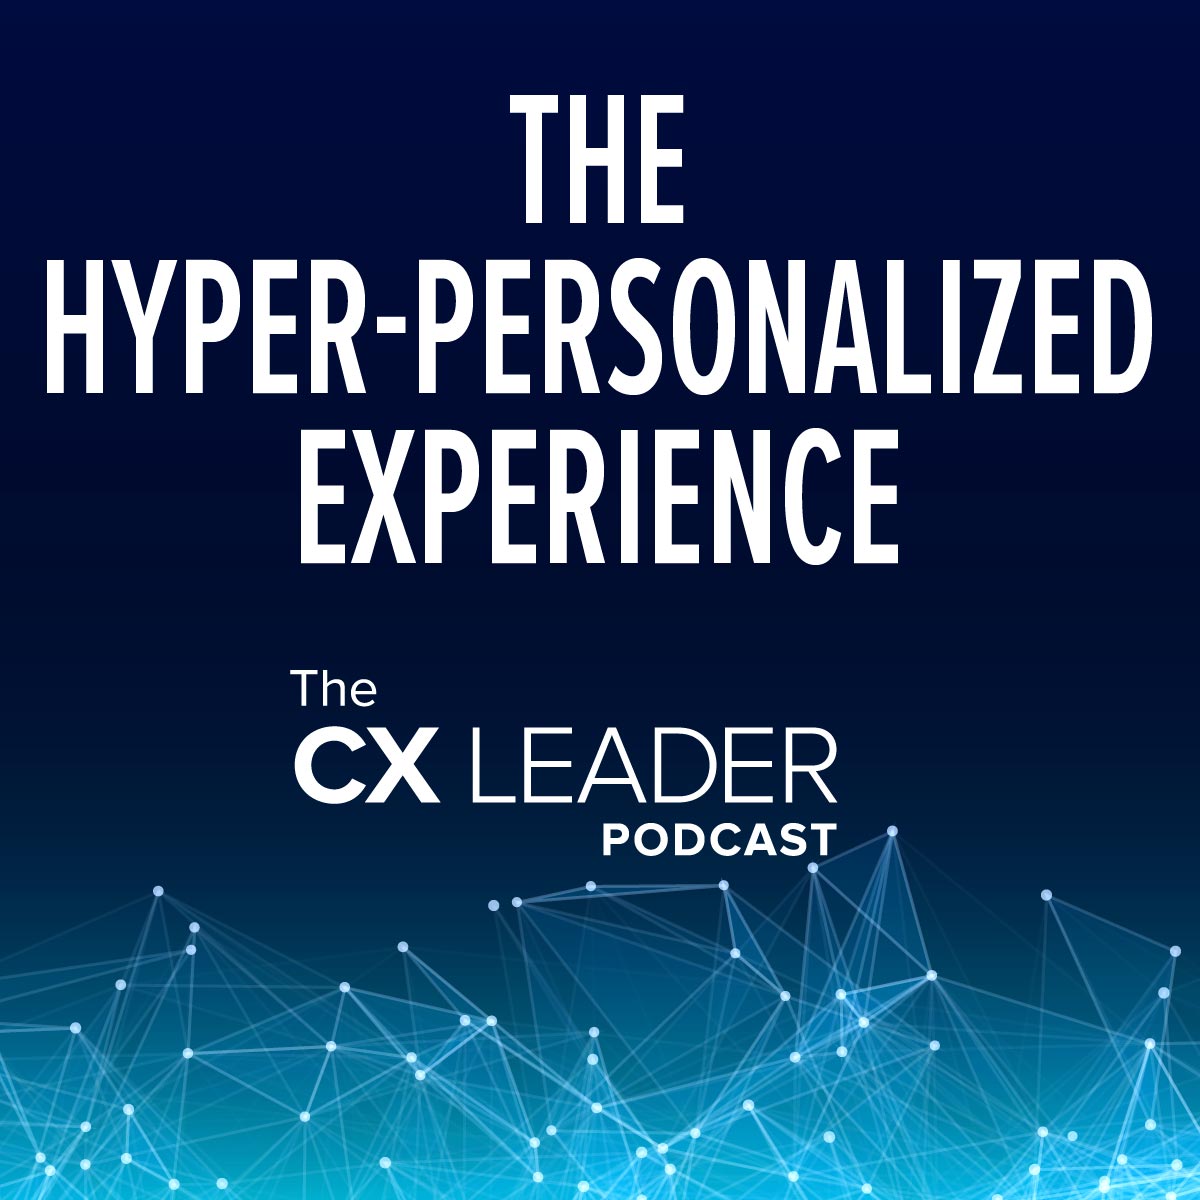 The Hyper-personalized Experience